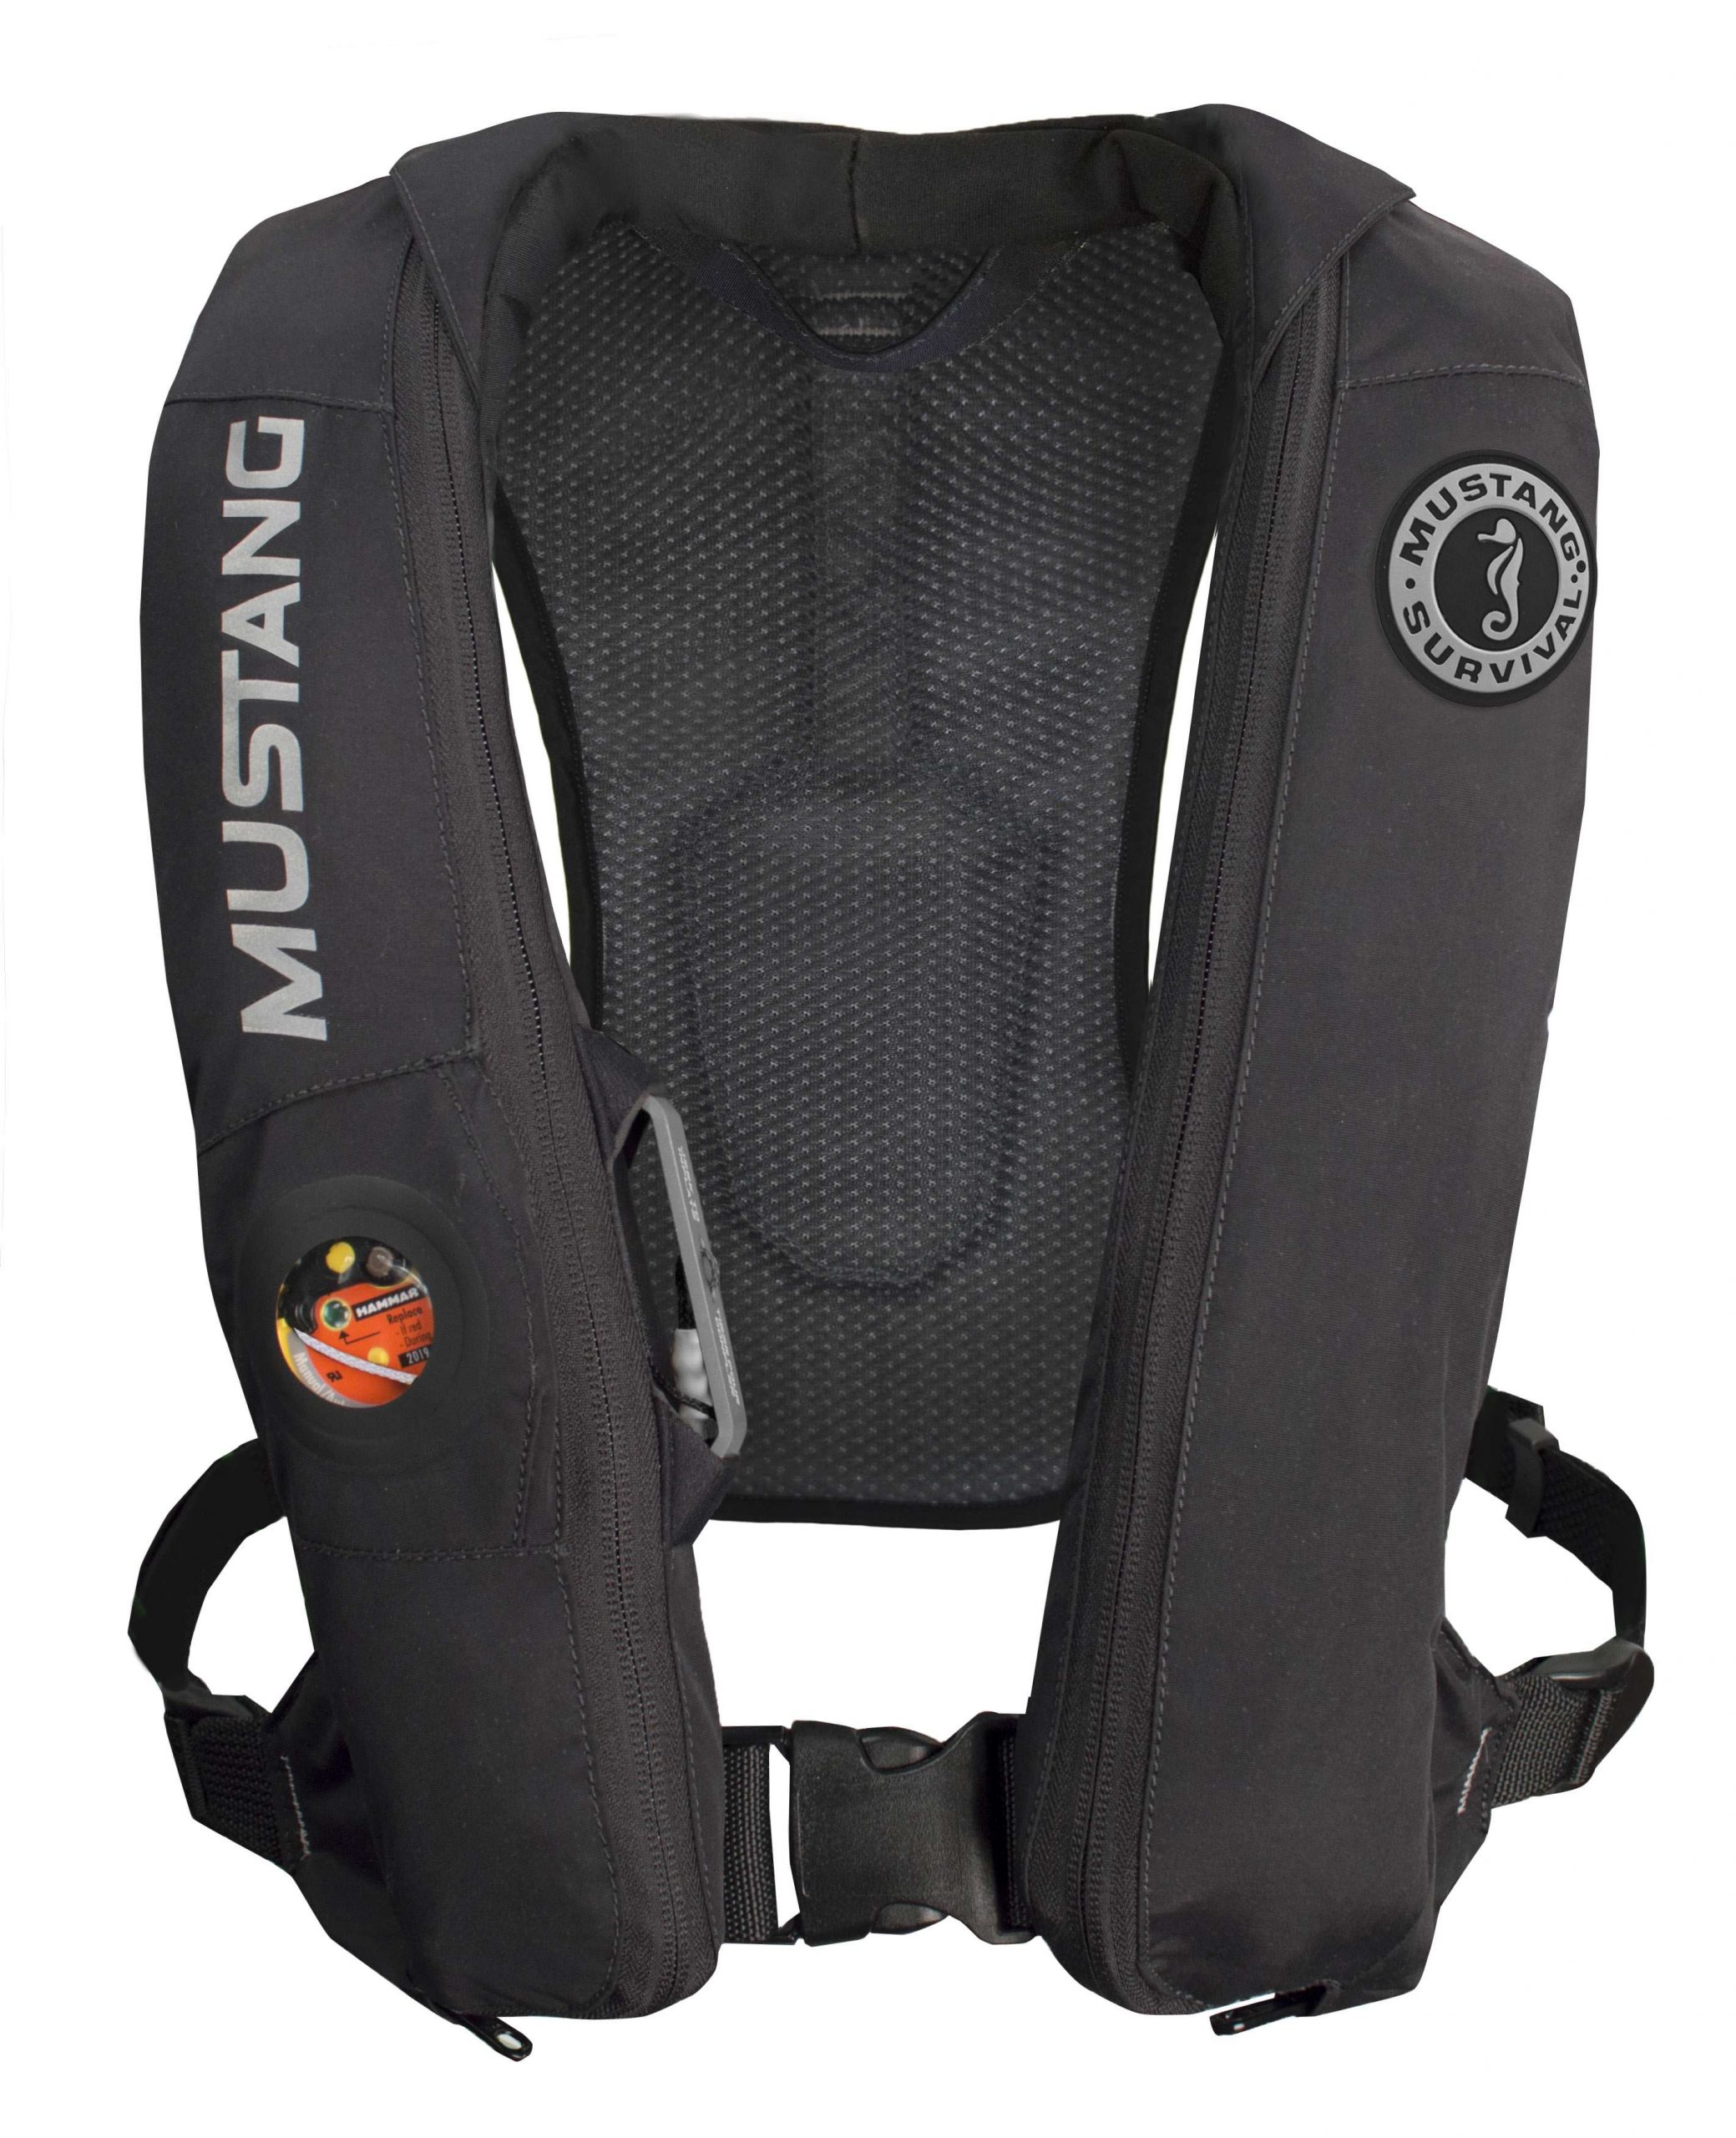 <B>MUSTANG SURVIVAL ELITE INFLATABLE PFD</b>
Built on a revolutionary 3-D chassis, this new PFD stays put at high speeds, lets you move freely and provides automatic inflation provided by exclusive technology. According to the Elite Series pros who will be wearing it at this yearâs Classic, it is so comfortable, you likely will forget to take it off before getting in the truck to go home. Swing by the Dickâs Sporting Goods booth to get one at a special âClassic promotion price.â